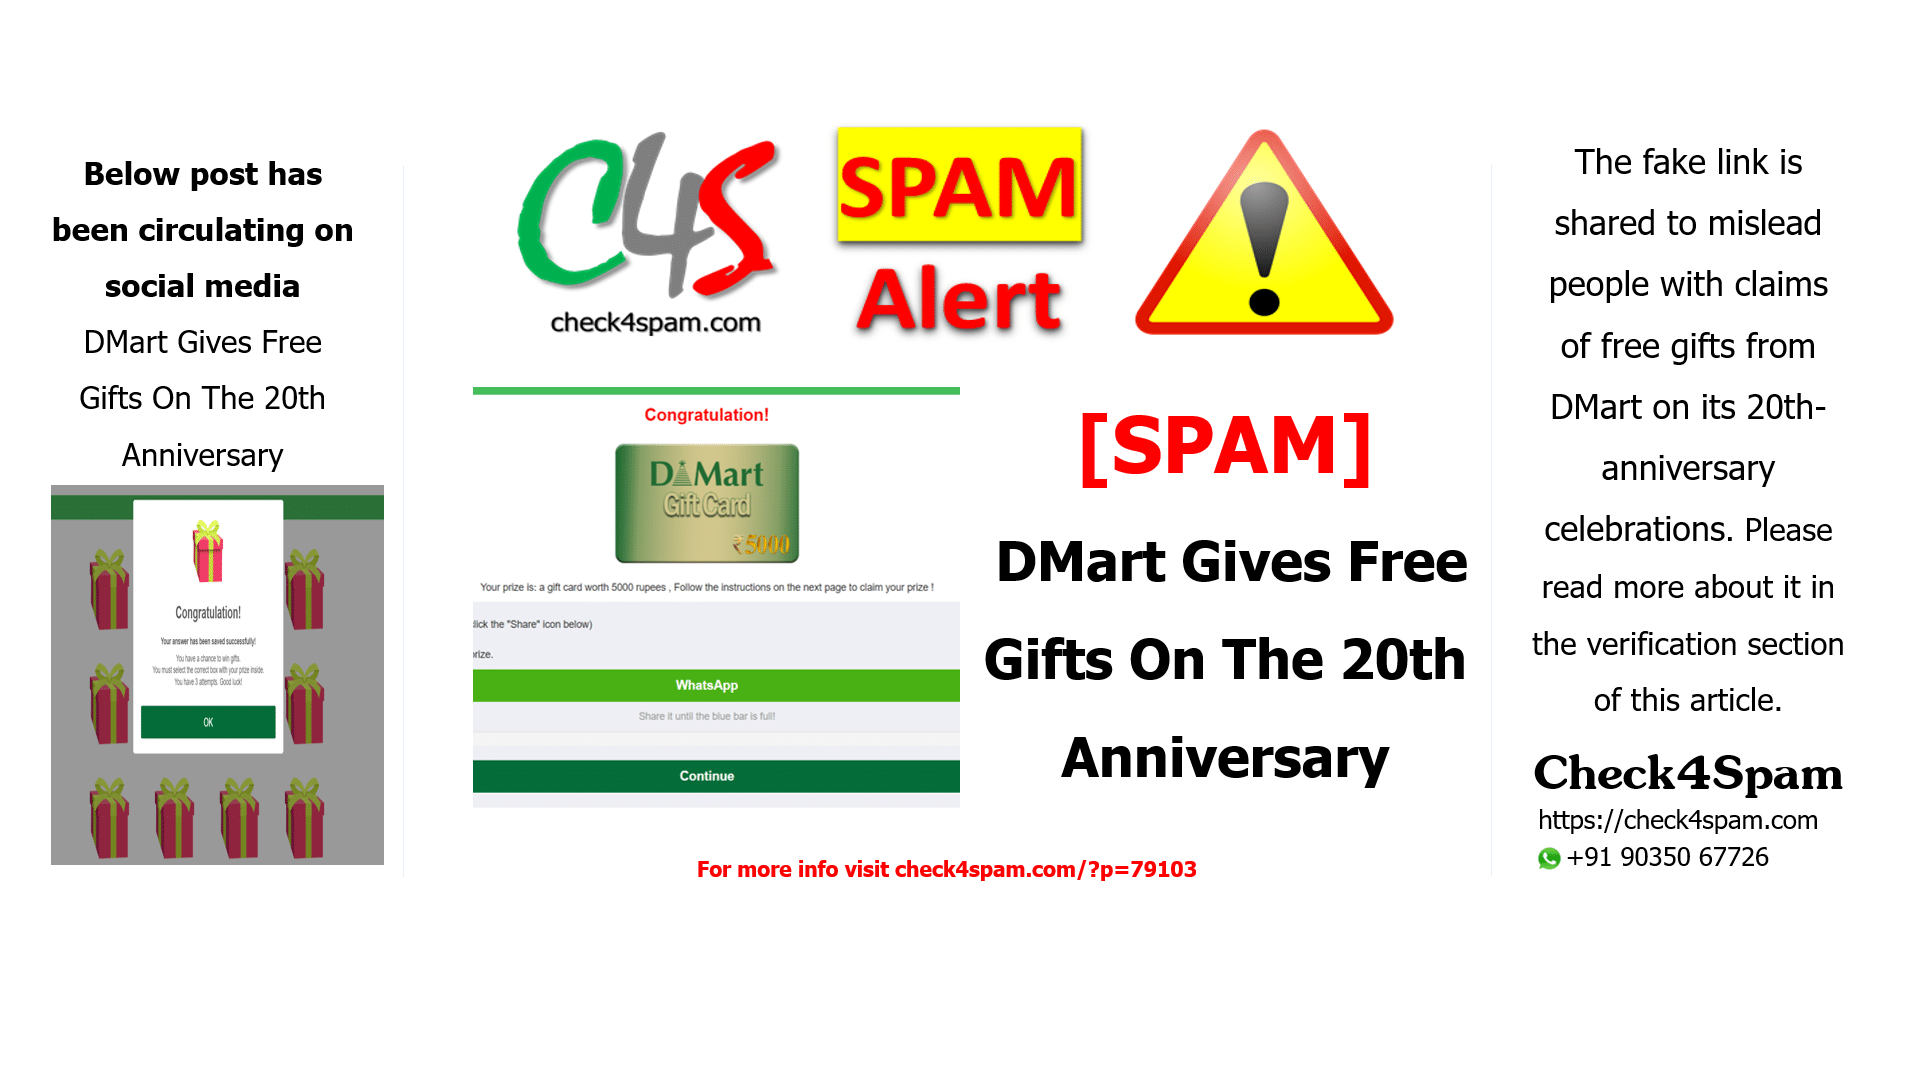 DMart Gives Free Gifts On The 20th Anniversary